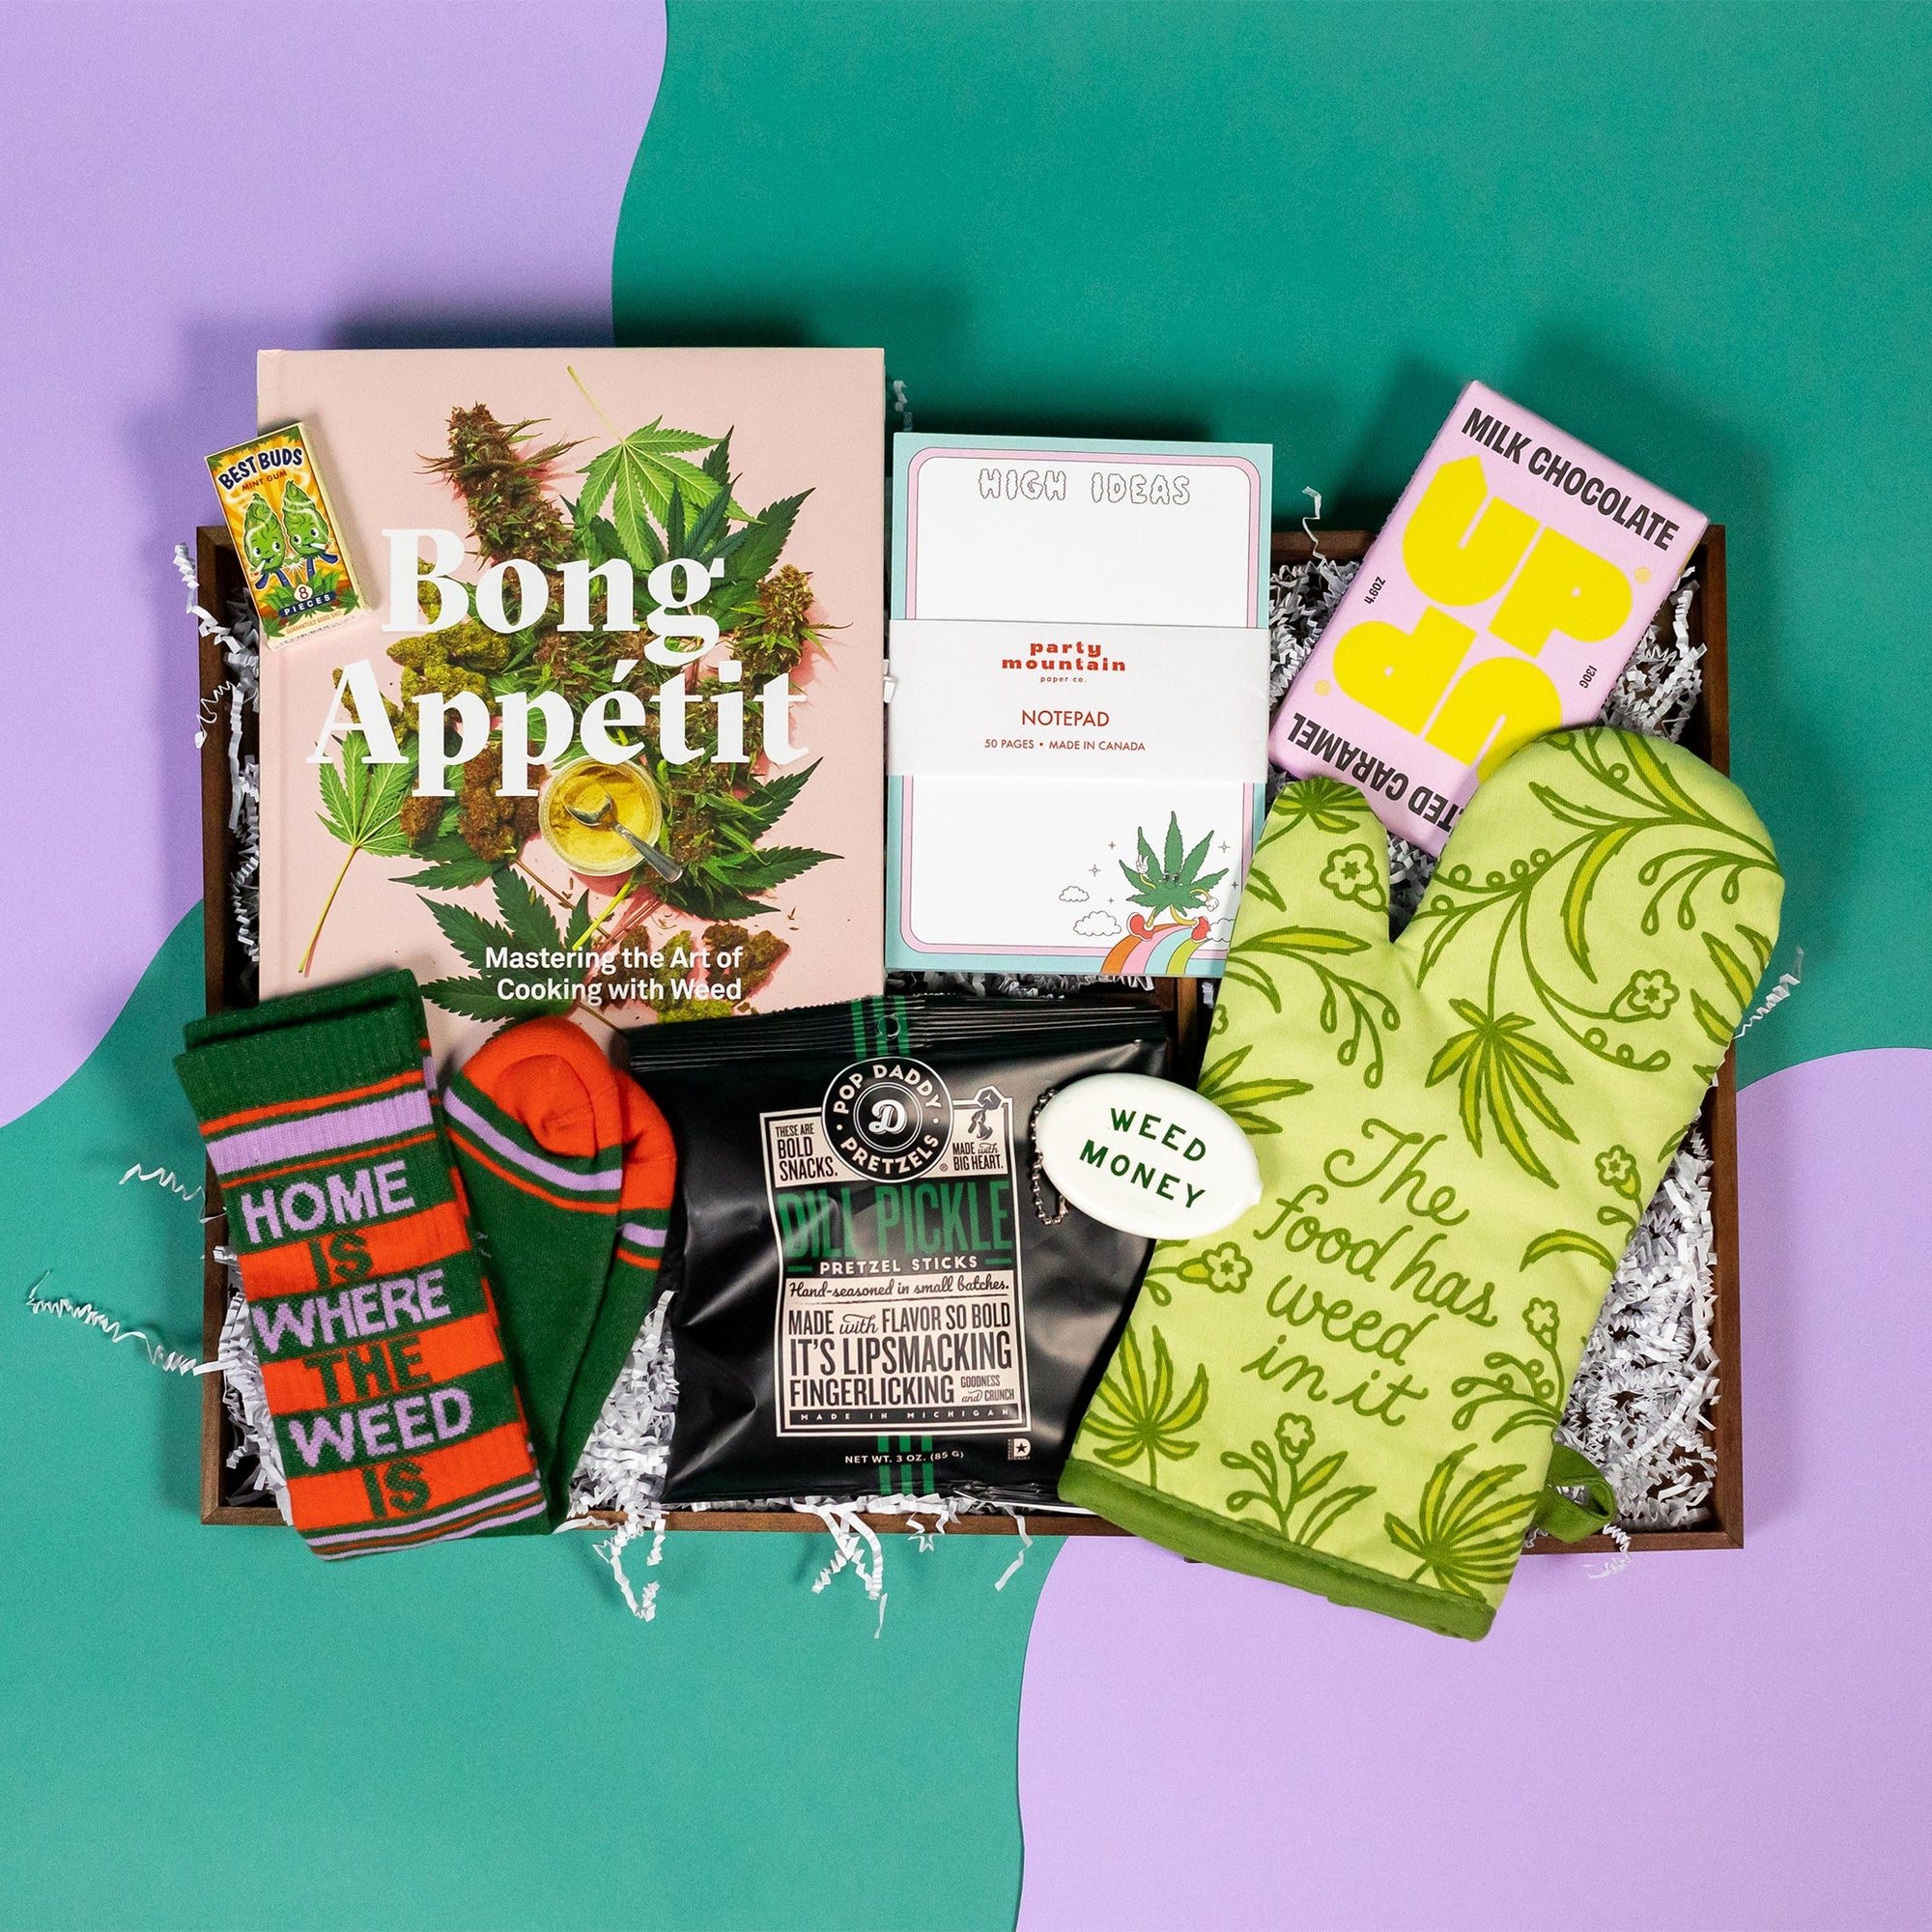 On a green and purple background sits a wooden tray of cannabis-themed gifts on white paper krinkle. The gifts include a "Bong Appetit" cookbook, "Home is Where the Weed Is" socks in kelly green, orange and lavender, a green illustrated oven mitt that says, "The Food Has Weed In It," "High Ideas" notepad with a cute cannabis cartoon, Pop Daddy Dill Pickle Popcorn, an UP UP Salted Caramel milk chocolate bar, a white coin keychain that says WEED MONEY in green and a tiny pack of novelty "Best Buds" gum.